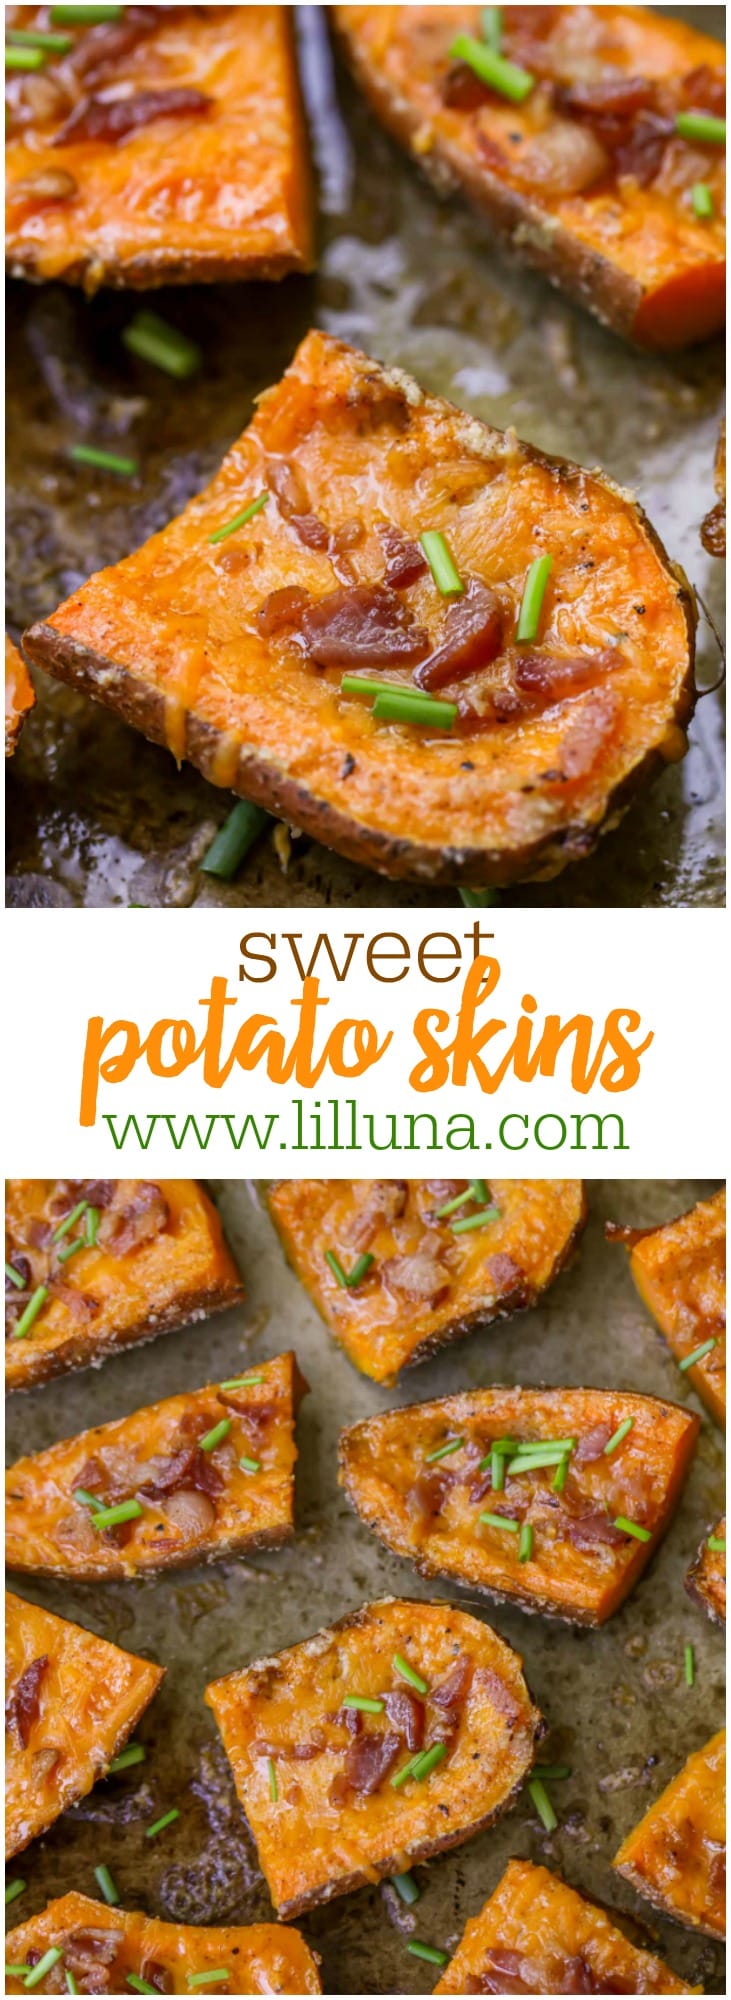 Sweet Potato Skins - a delicious appetizer with a buttery Parmesan crusted glaze and topped with bacon and chives.